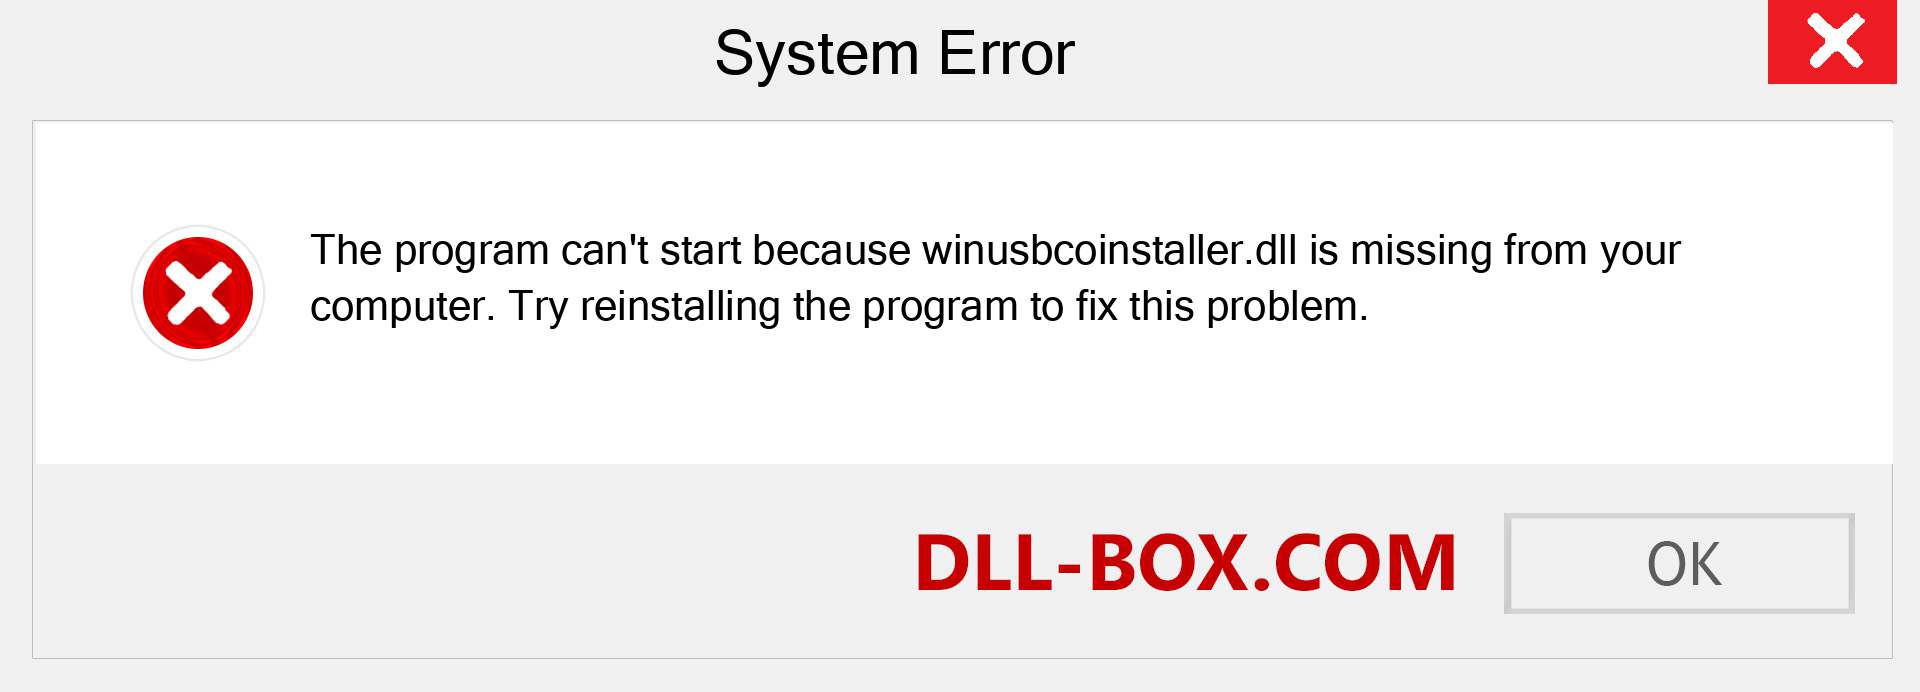  winusbcoinstaller.dll file is missing?. Download for Windows 7, 8, 10 - Fix  winusbcoinstaller dll Missing Error on Windows, photos, images